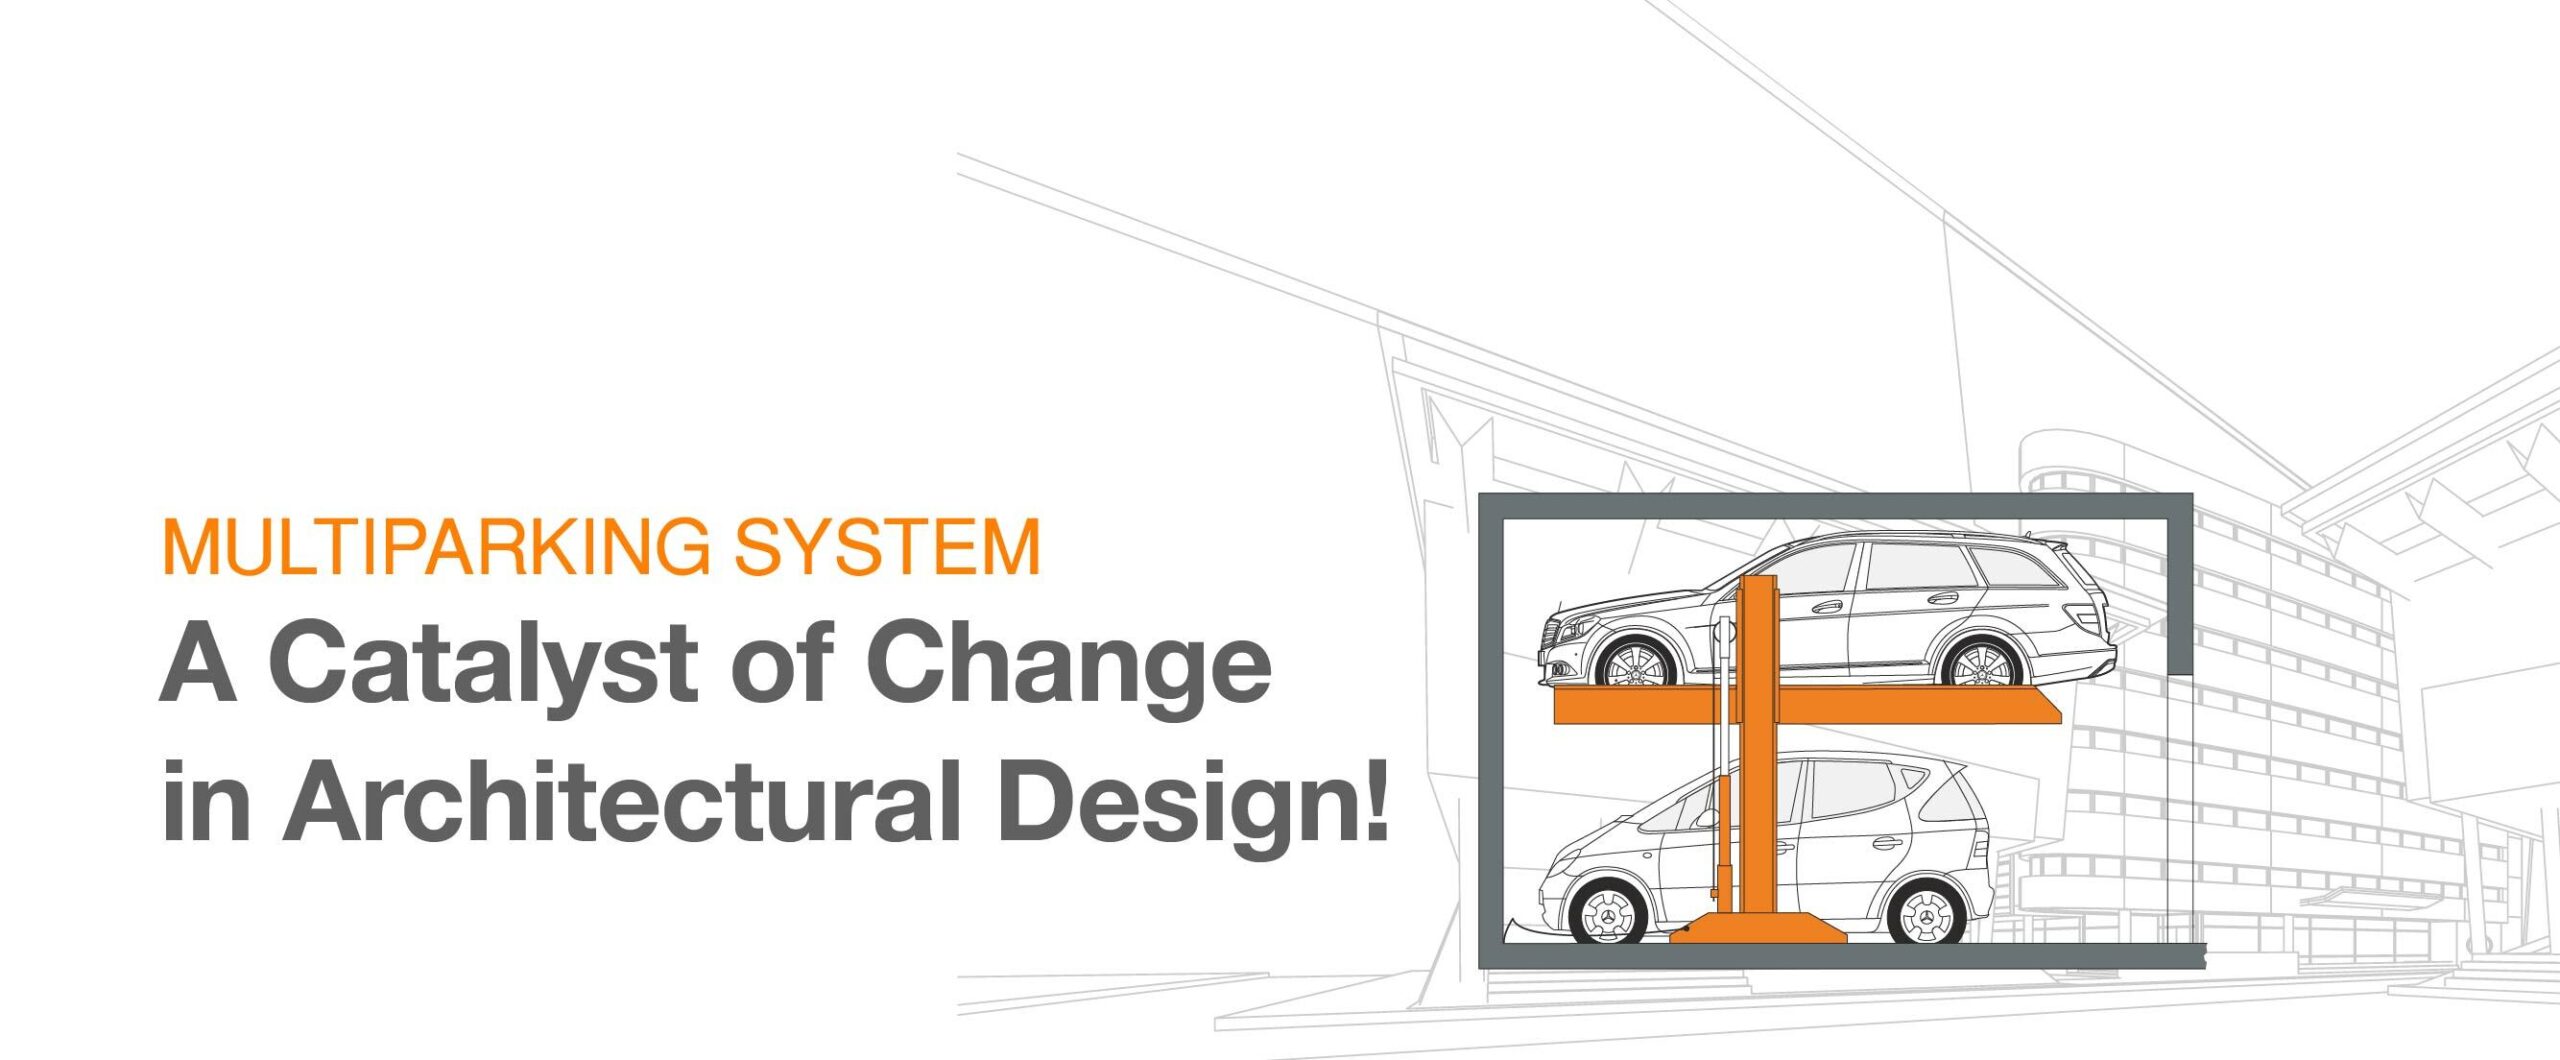 Multiparking System - A Catalyst of Change in Architectural Design!